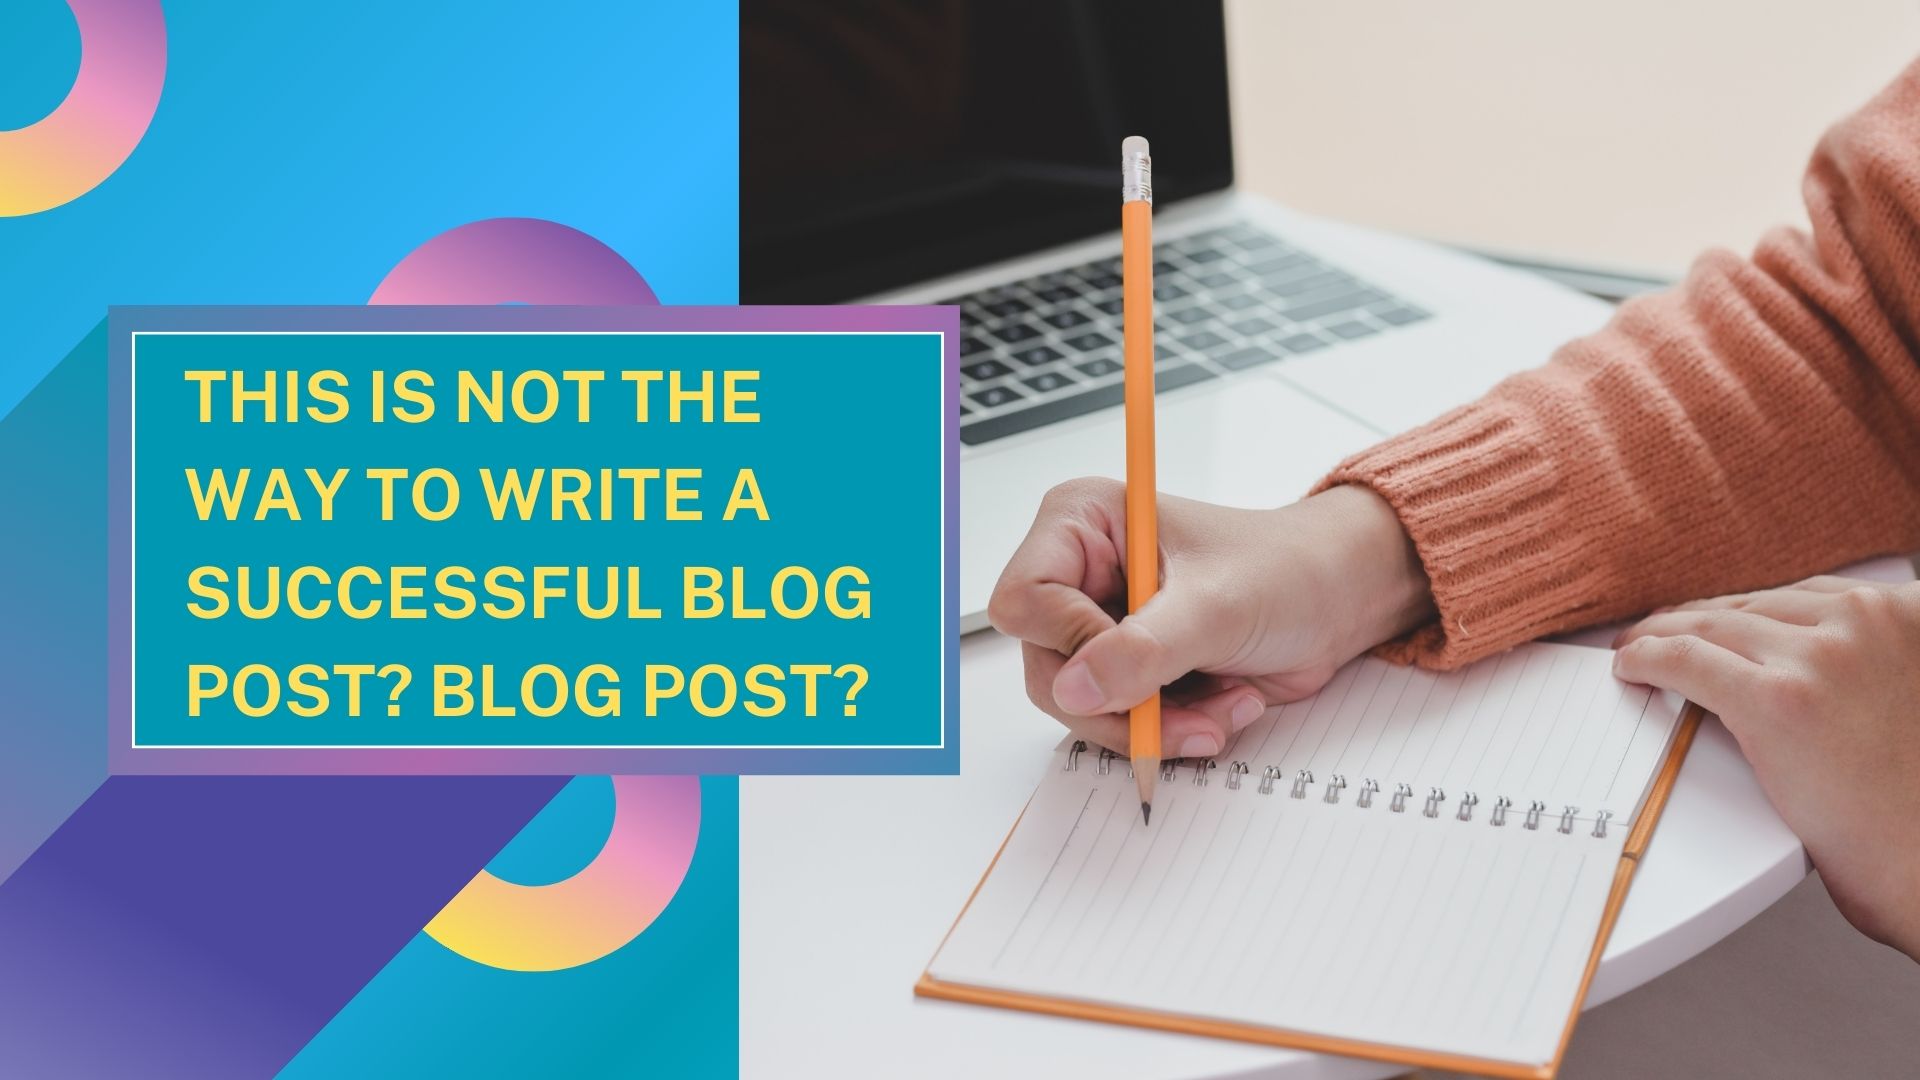 4. Write Your First Blog Post